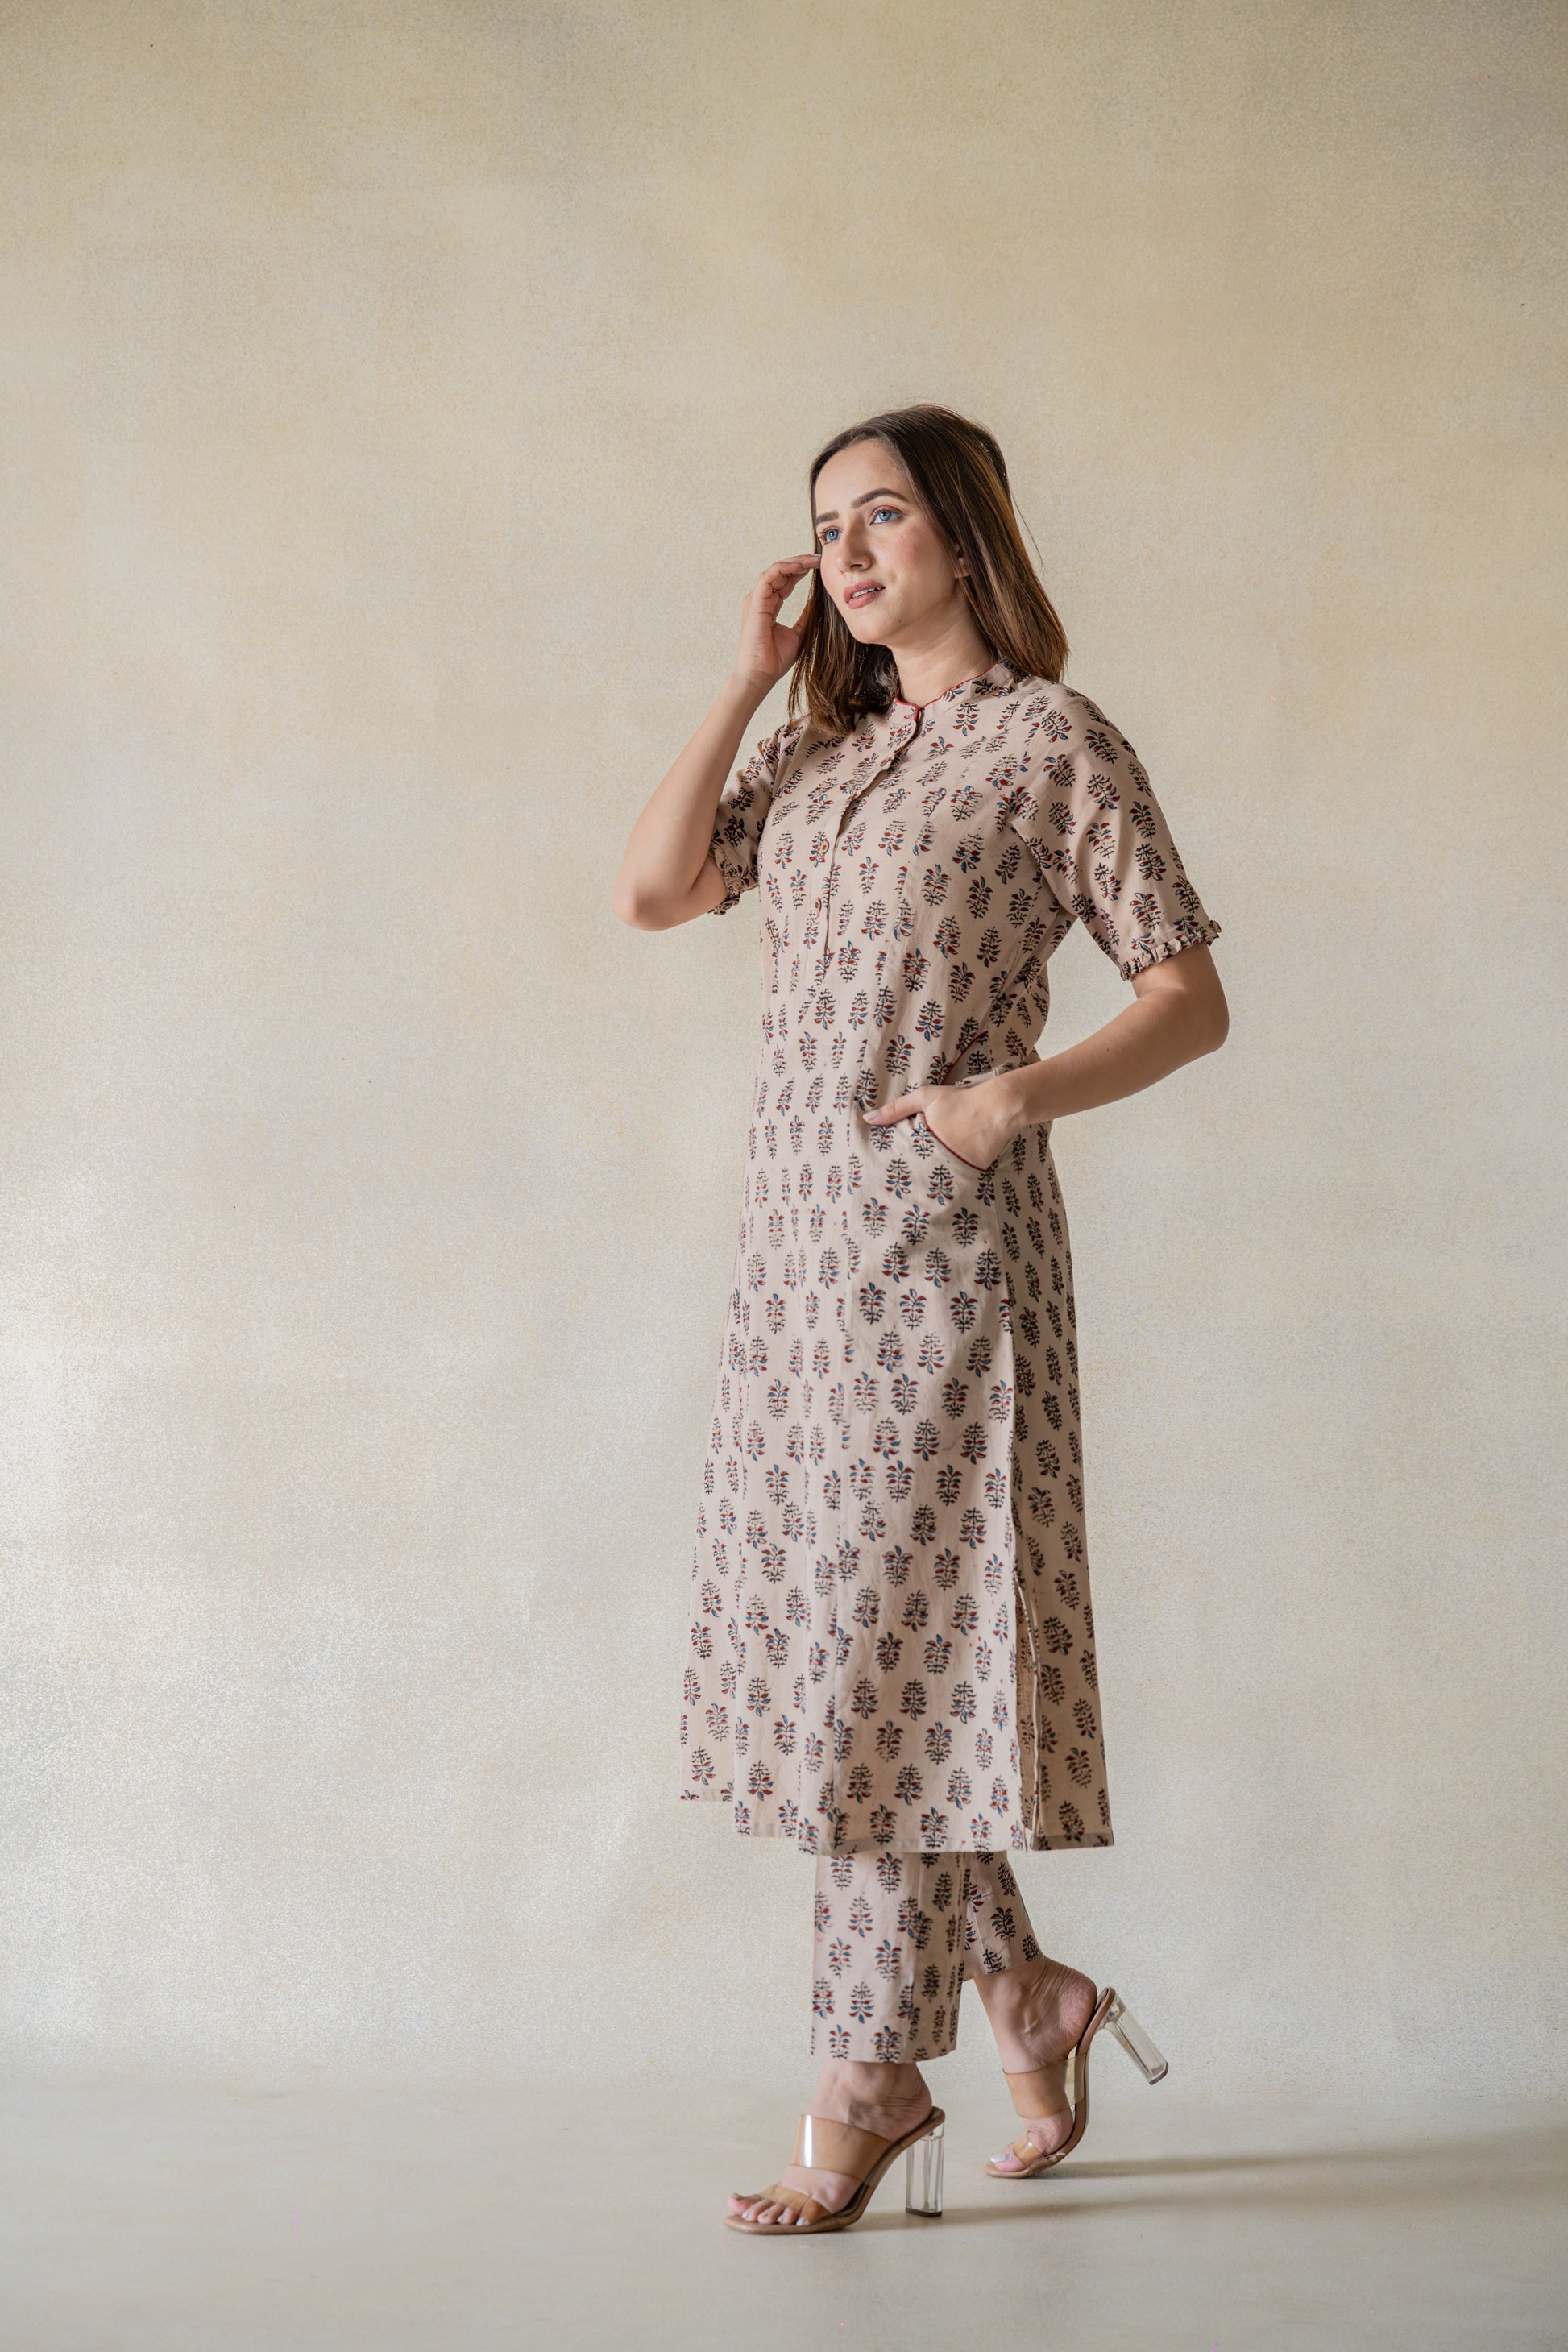 Exquisitely handcrafted with sourced materials, the Vrinda Co-ord Set is designed to bring effortless sophistication into your wardrobe. The ajrakh boota print kurta and pants set, dyed with natural resources, feature a mandarin collared neck, frills on the sleeves hem, and front pockets for extra convenience. The pants come with an elasticated waistband for a comfortable fit. This slow-made ensemble is perfect for everyday wear.